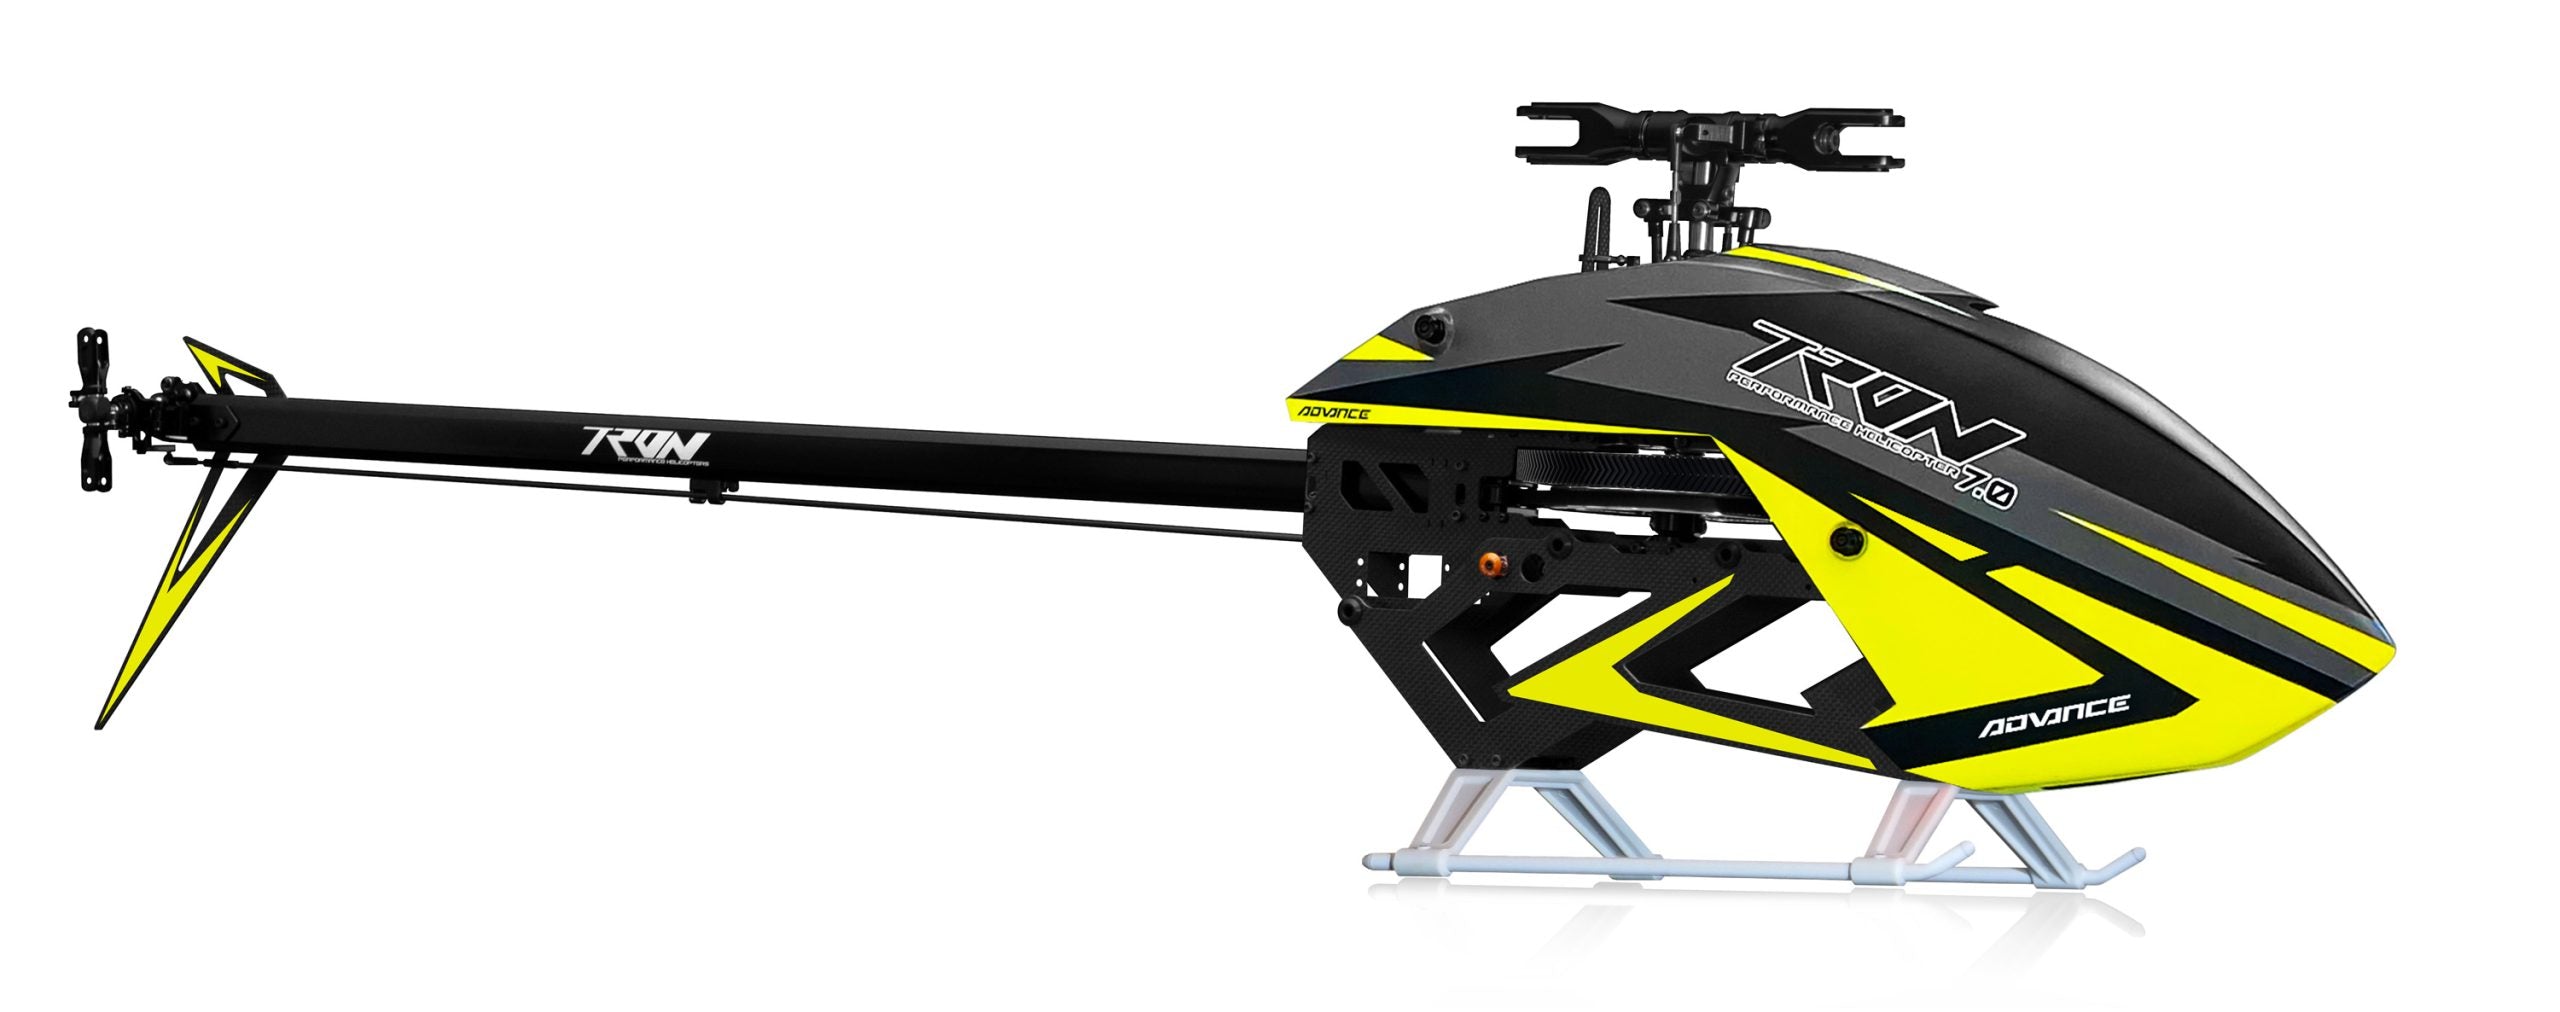 Tron 7.0 Advance Helicopter Kit Grey / Neon Yellow